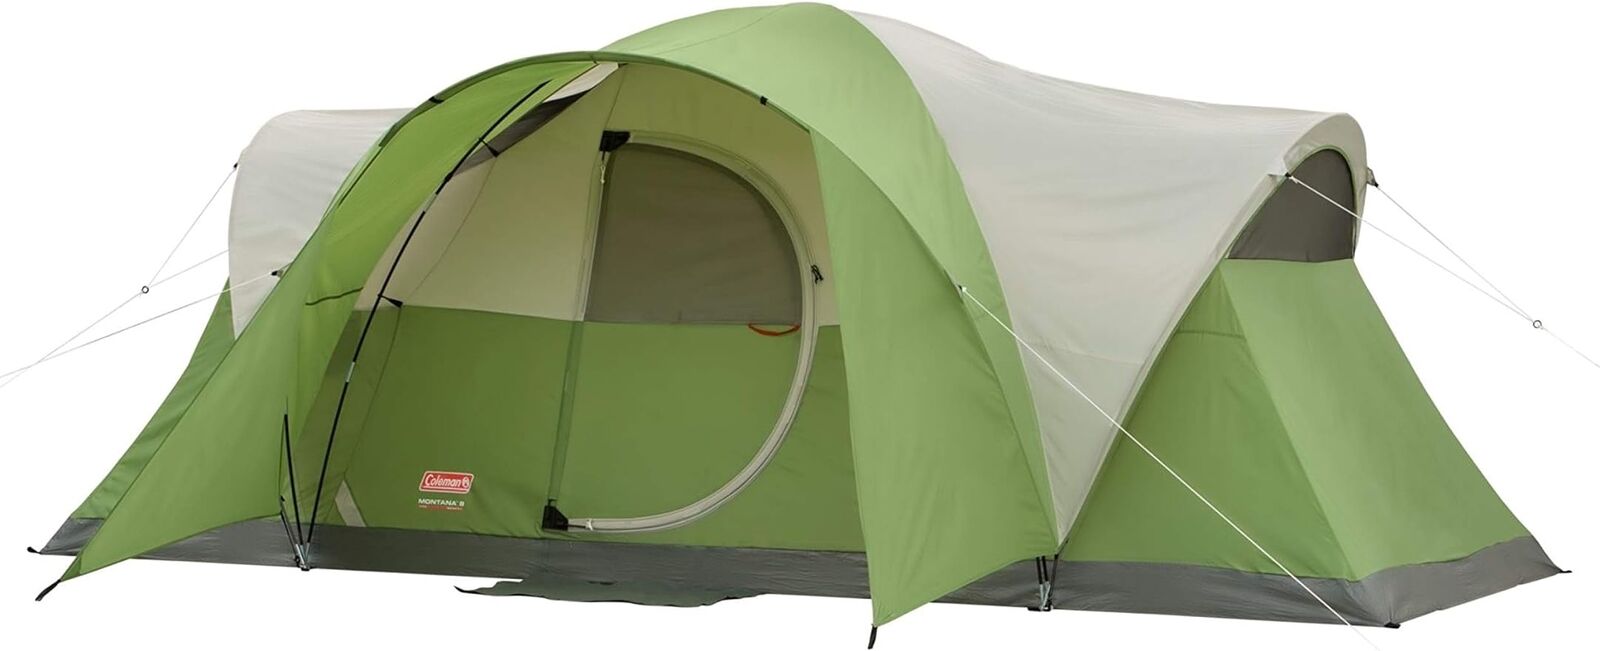 Montana Camping Tent, 6/8 Person Family Tent with Included Rainfly, Carry Bag